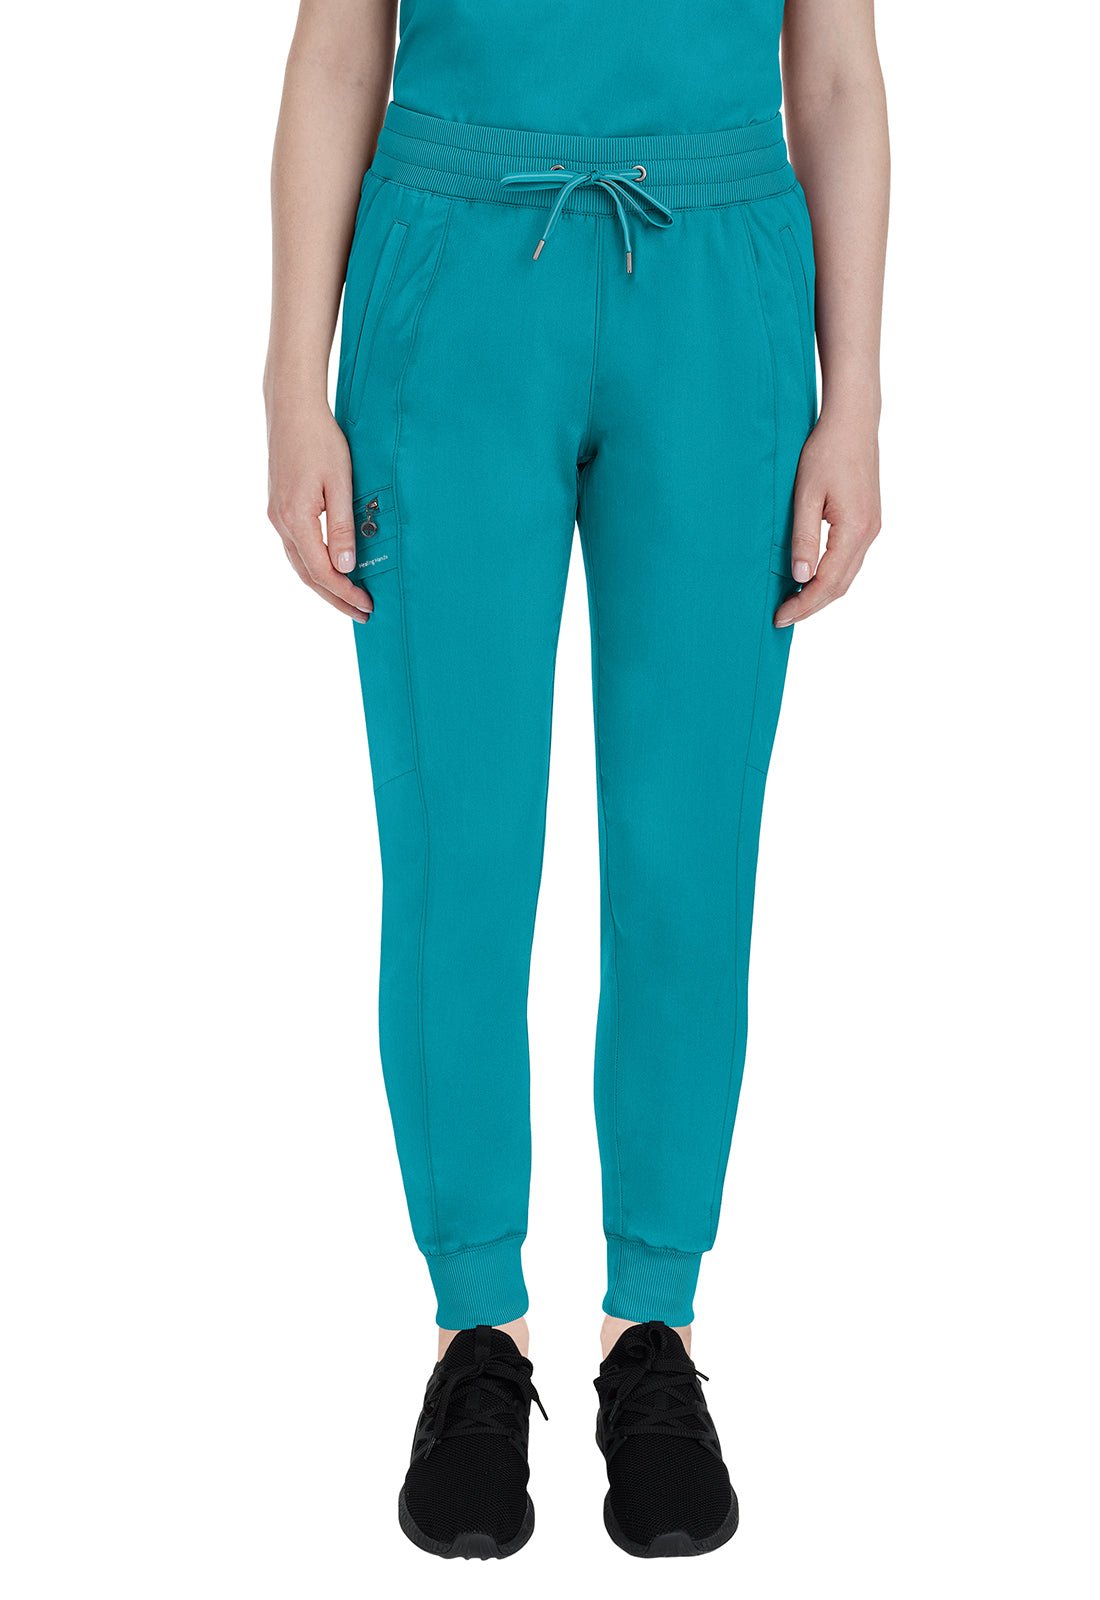 Healing Hands Toby Jogger Pant 9244 in Ceil, Hunter, Teal, White - Scrubs Select